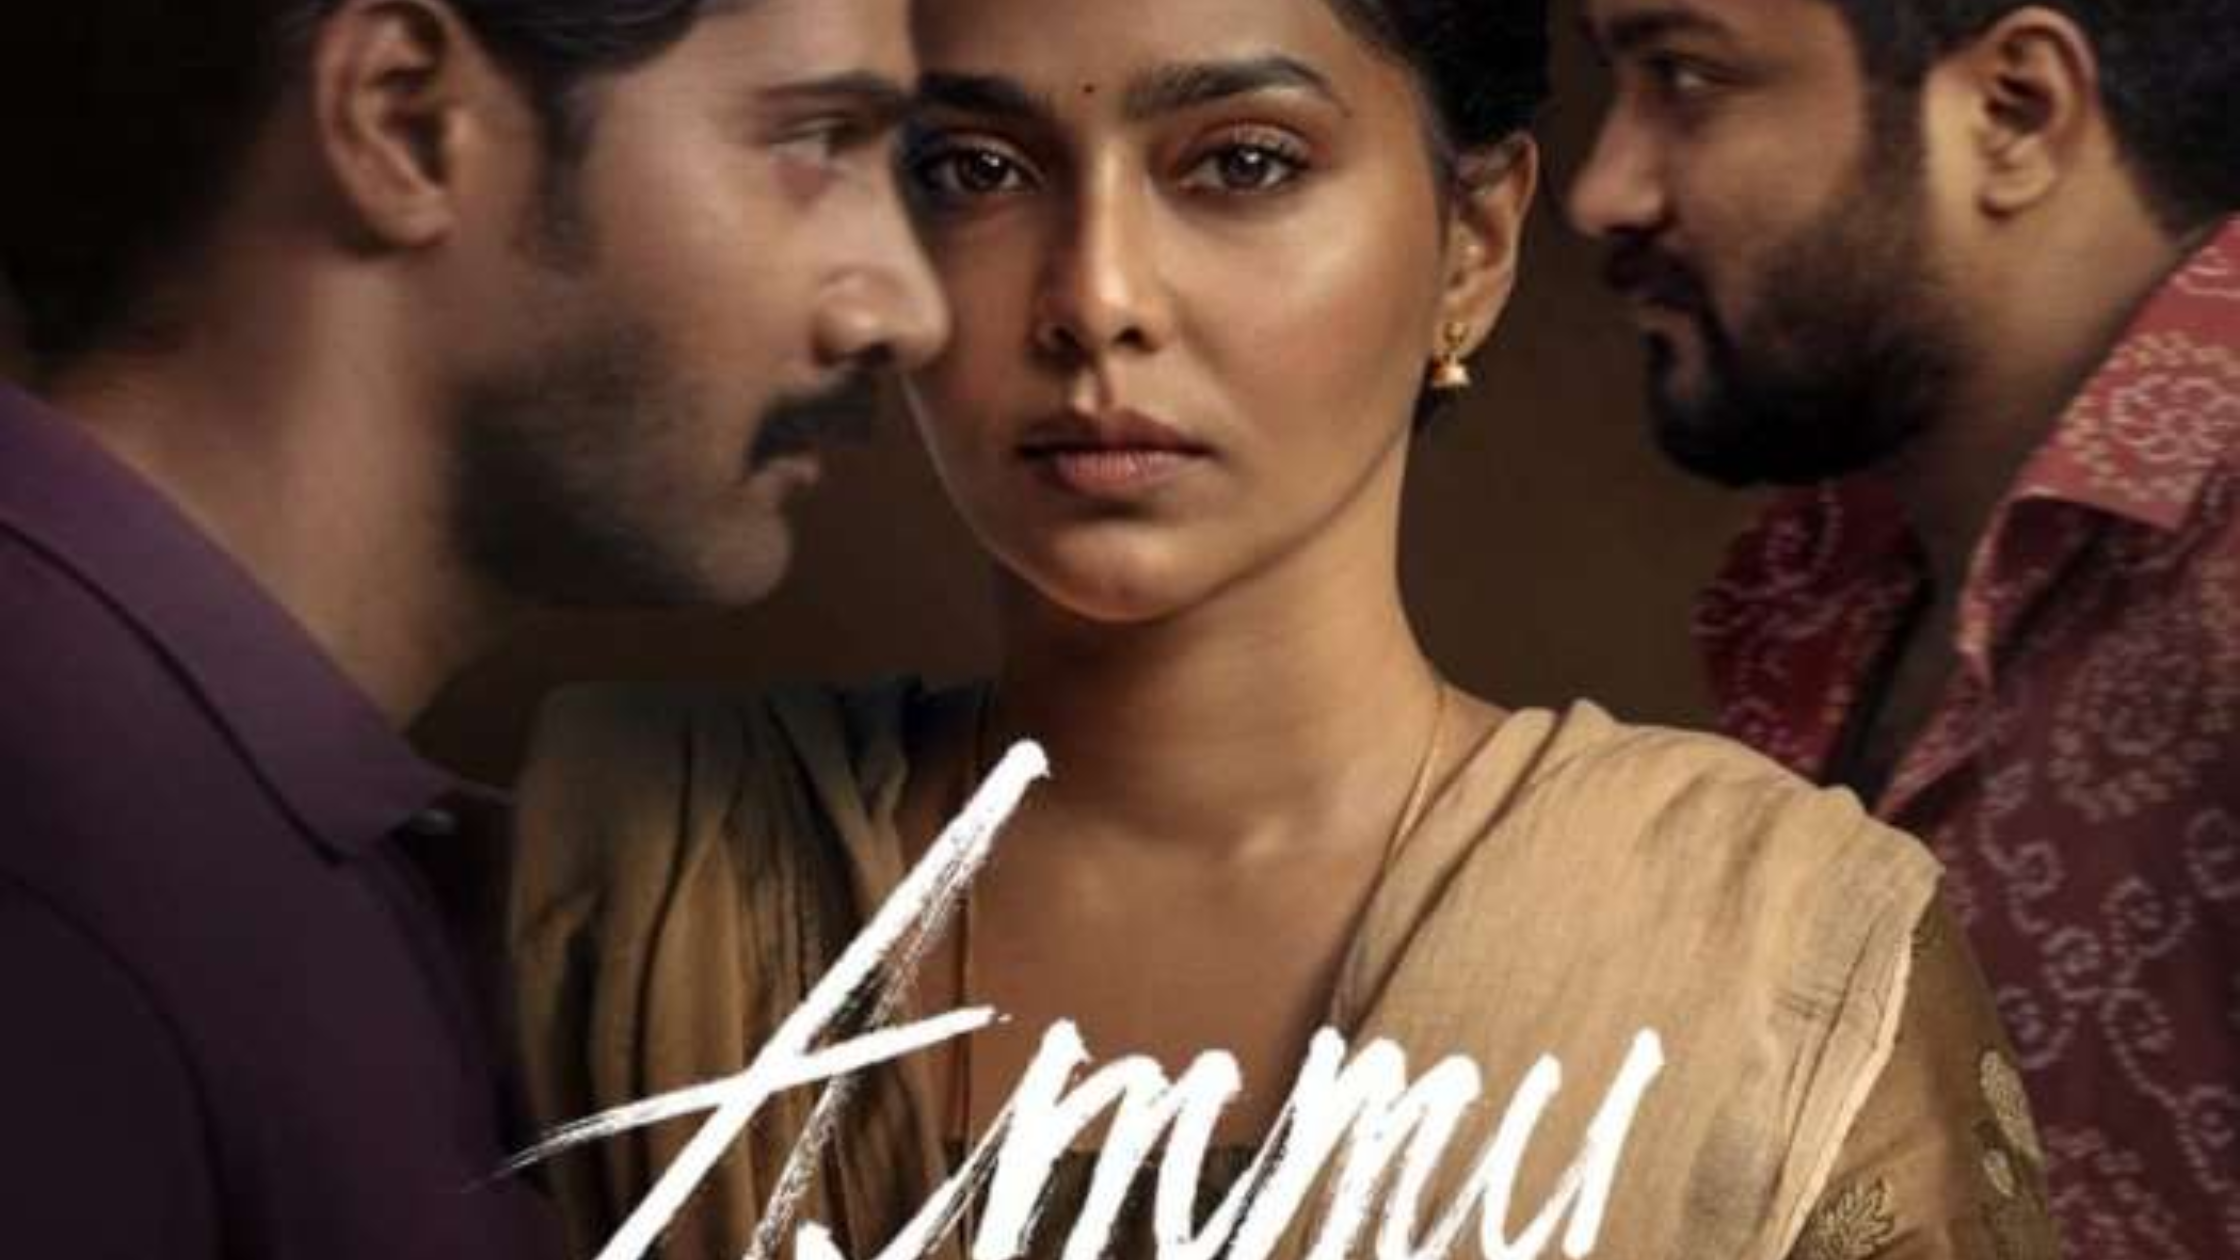 ammu movie review in hindi